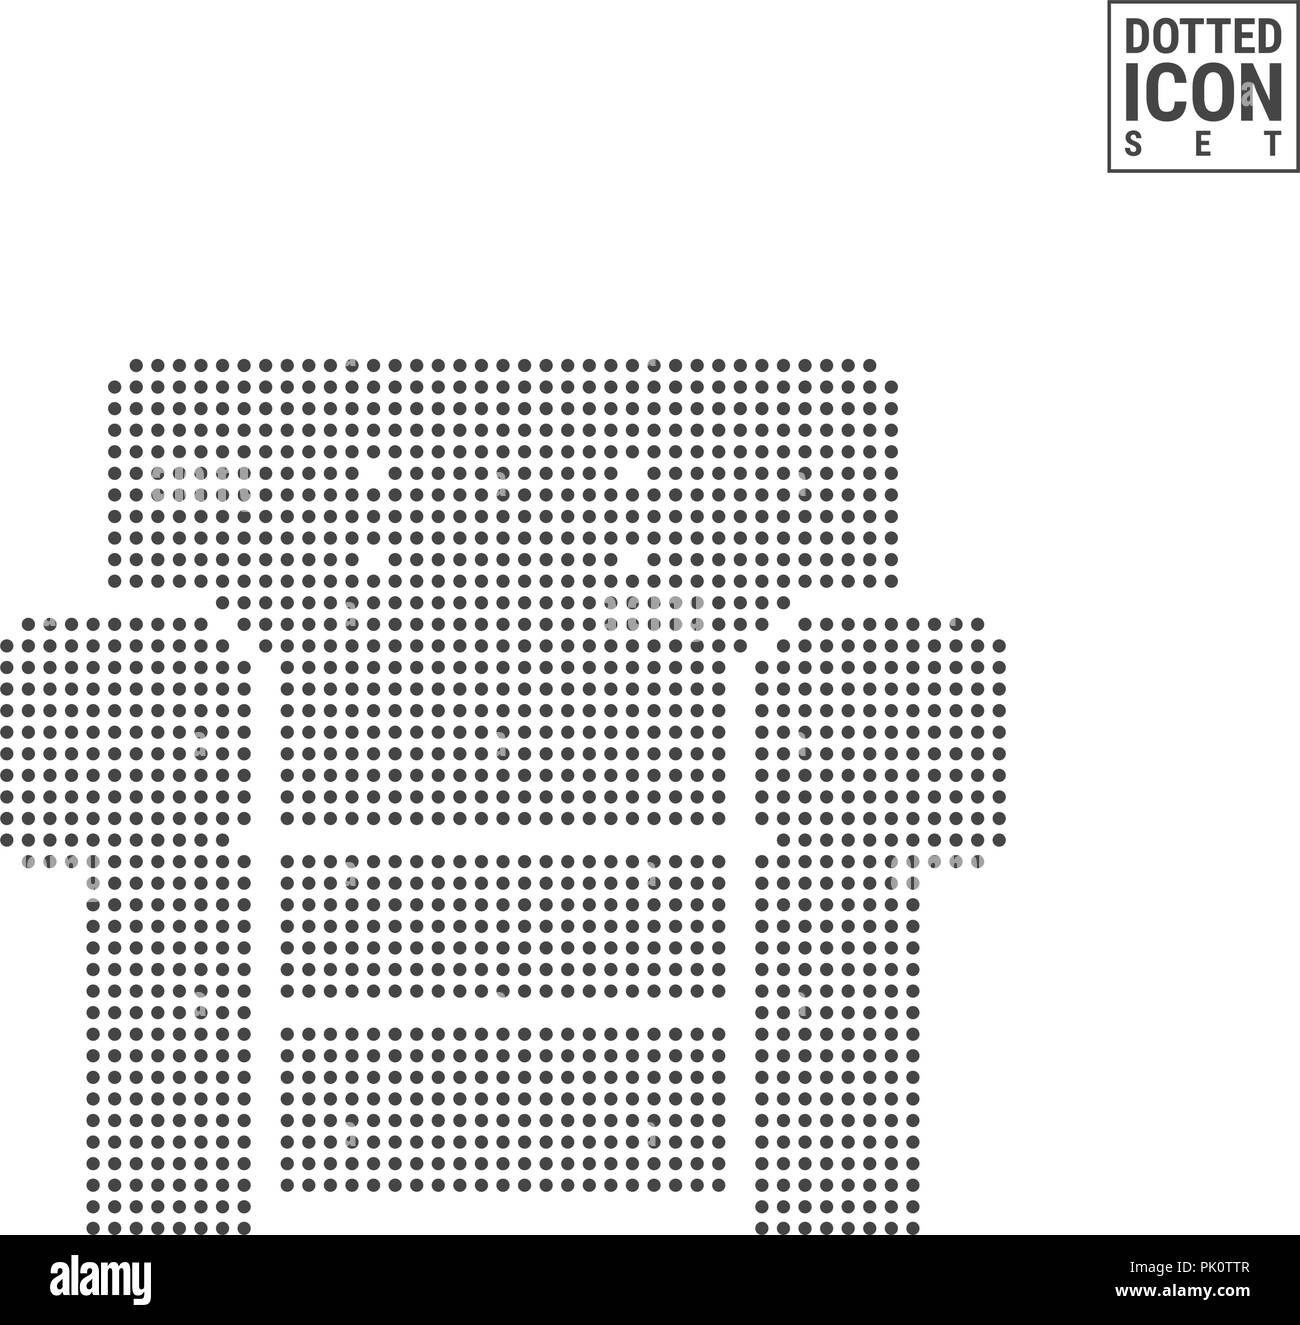 Soft Chair Dot Pattern Icon. Armchair Dotted Icon Isolated on White Background. Vector Illustration or Design Template. Can Be Used for Advertising, Web and Mobile UI. Stock Vector